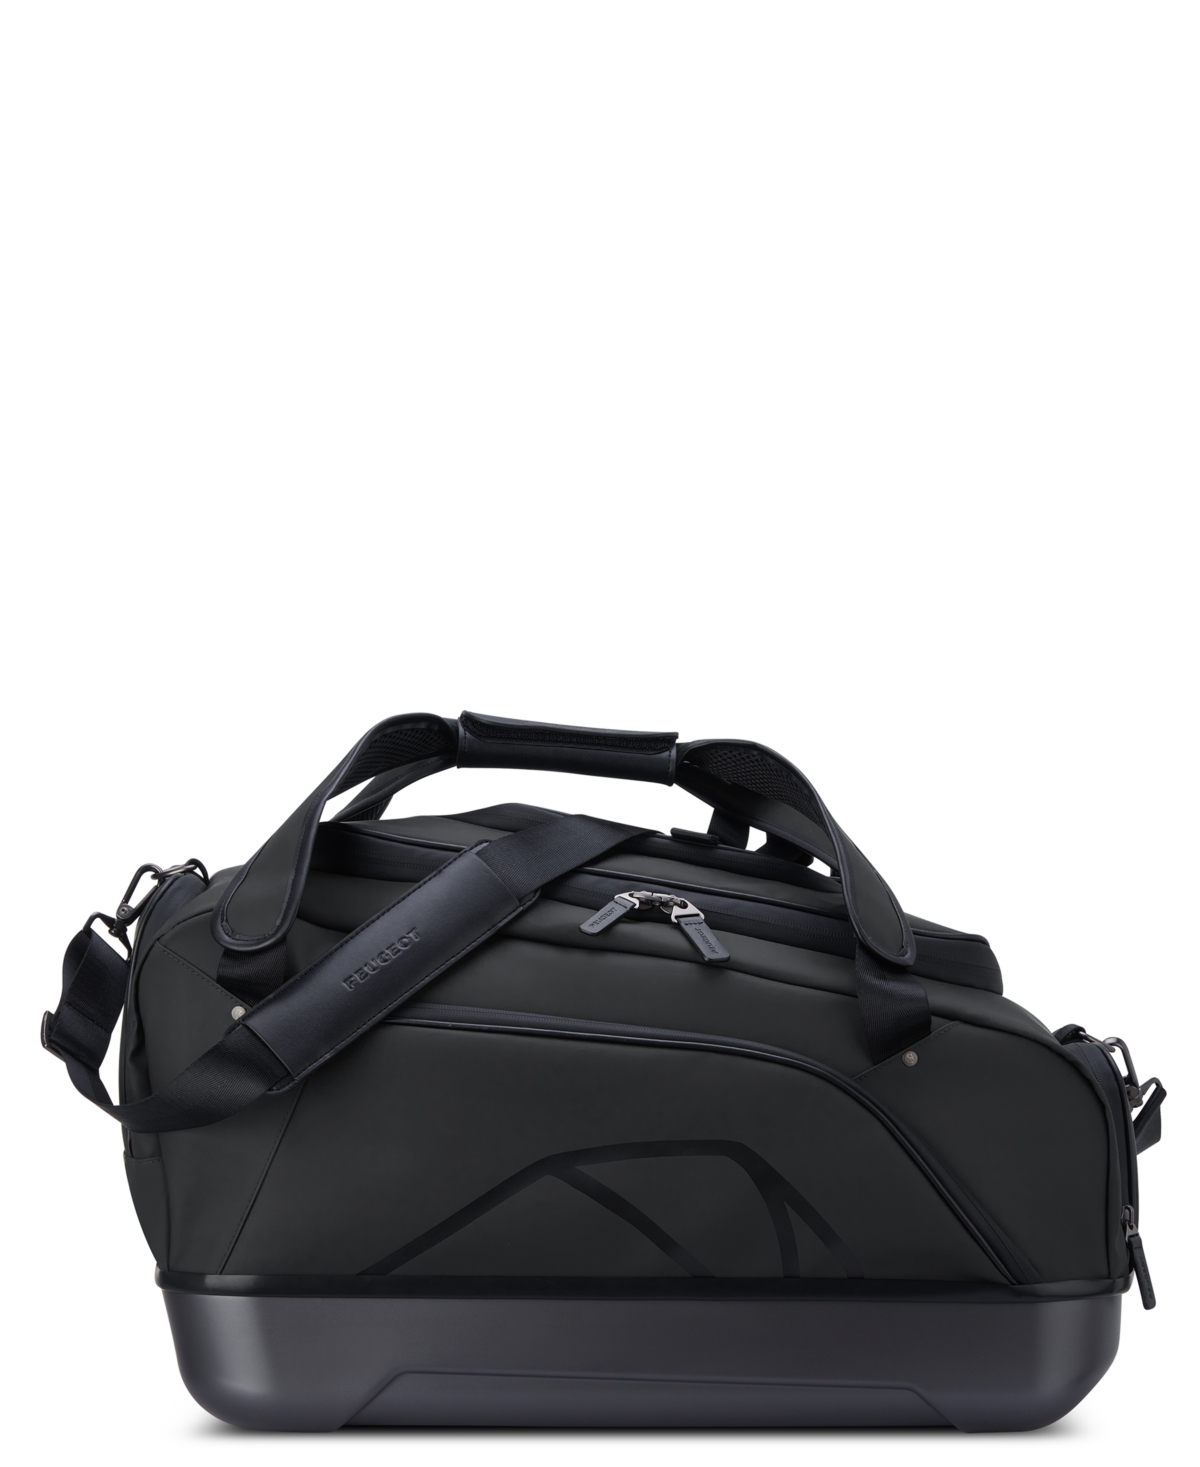 Voyages 21" Carry-On Duffle Bag - Black